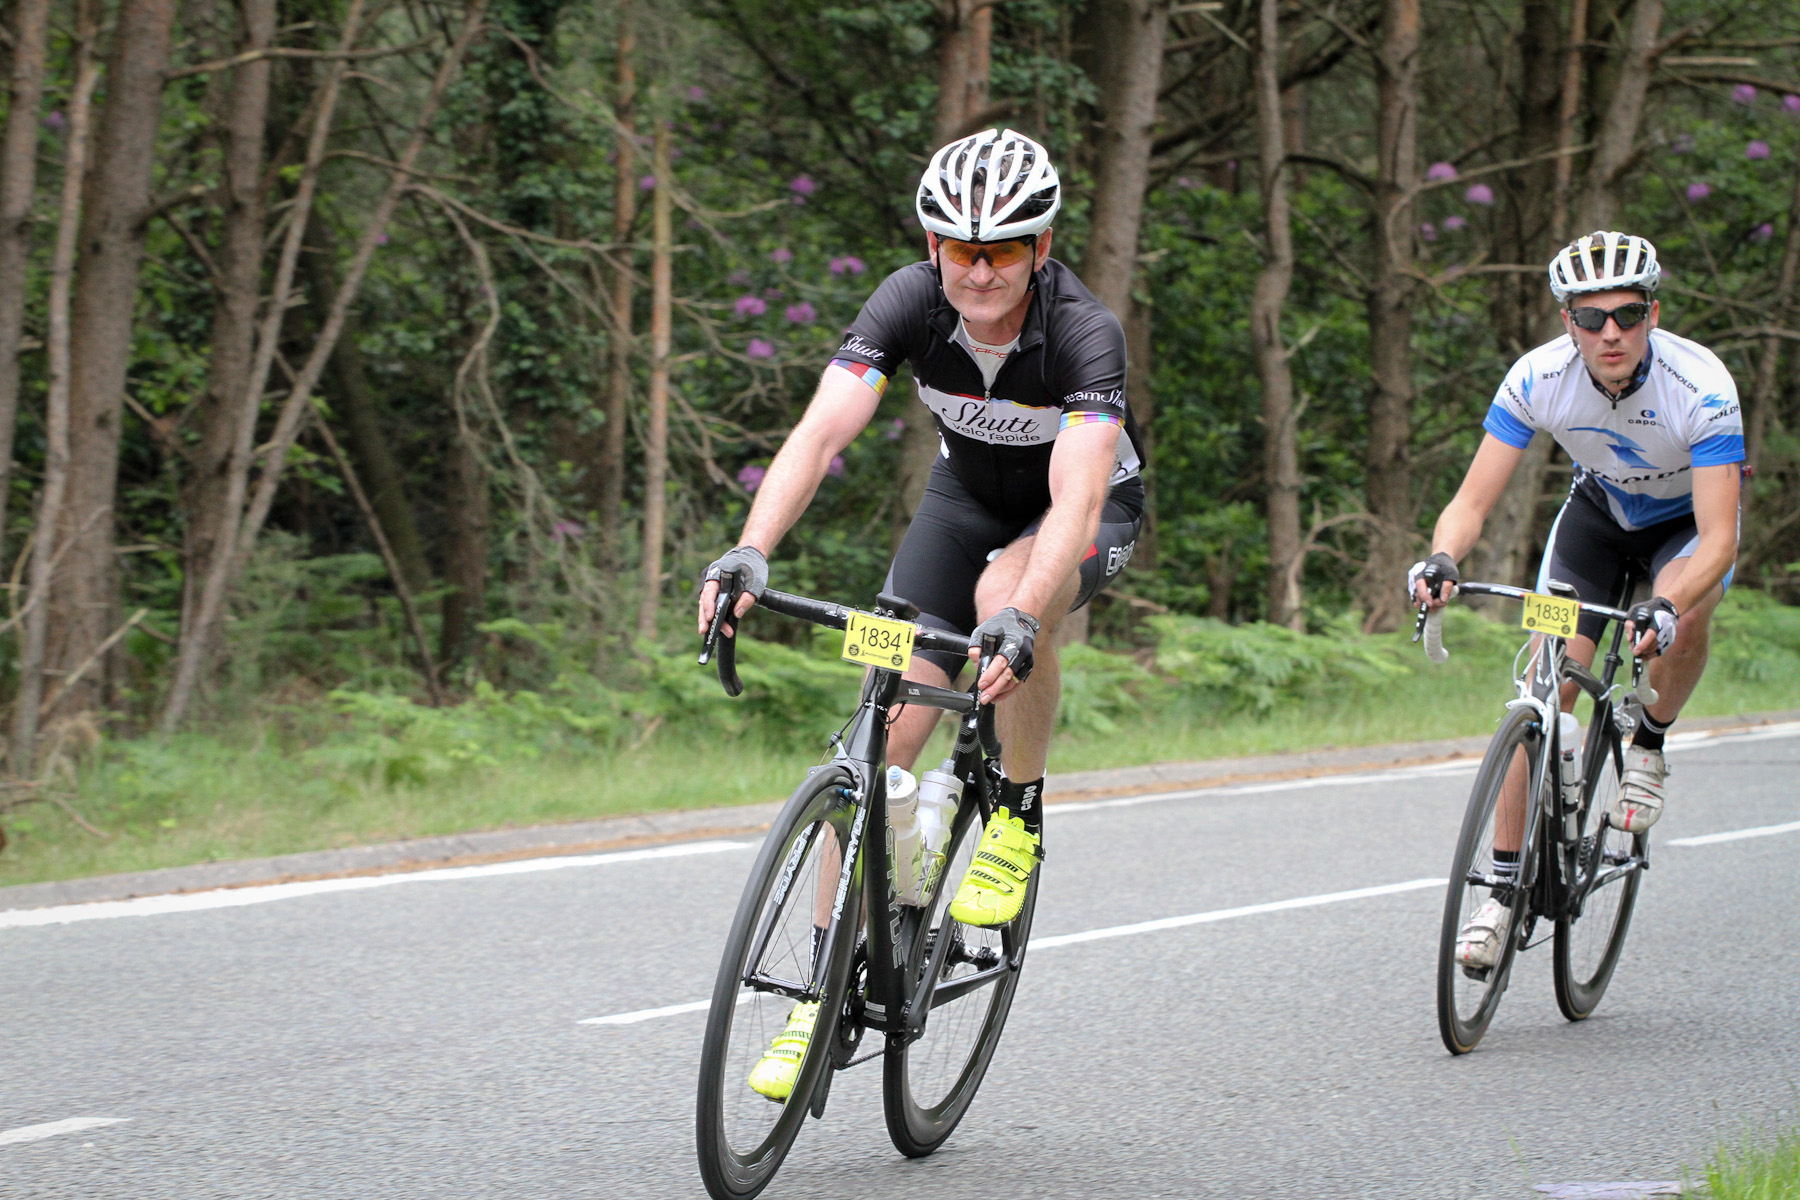 In action at the Wiggle UKCE Bournemouth Sportive